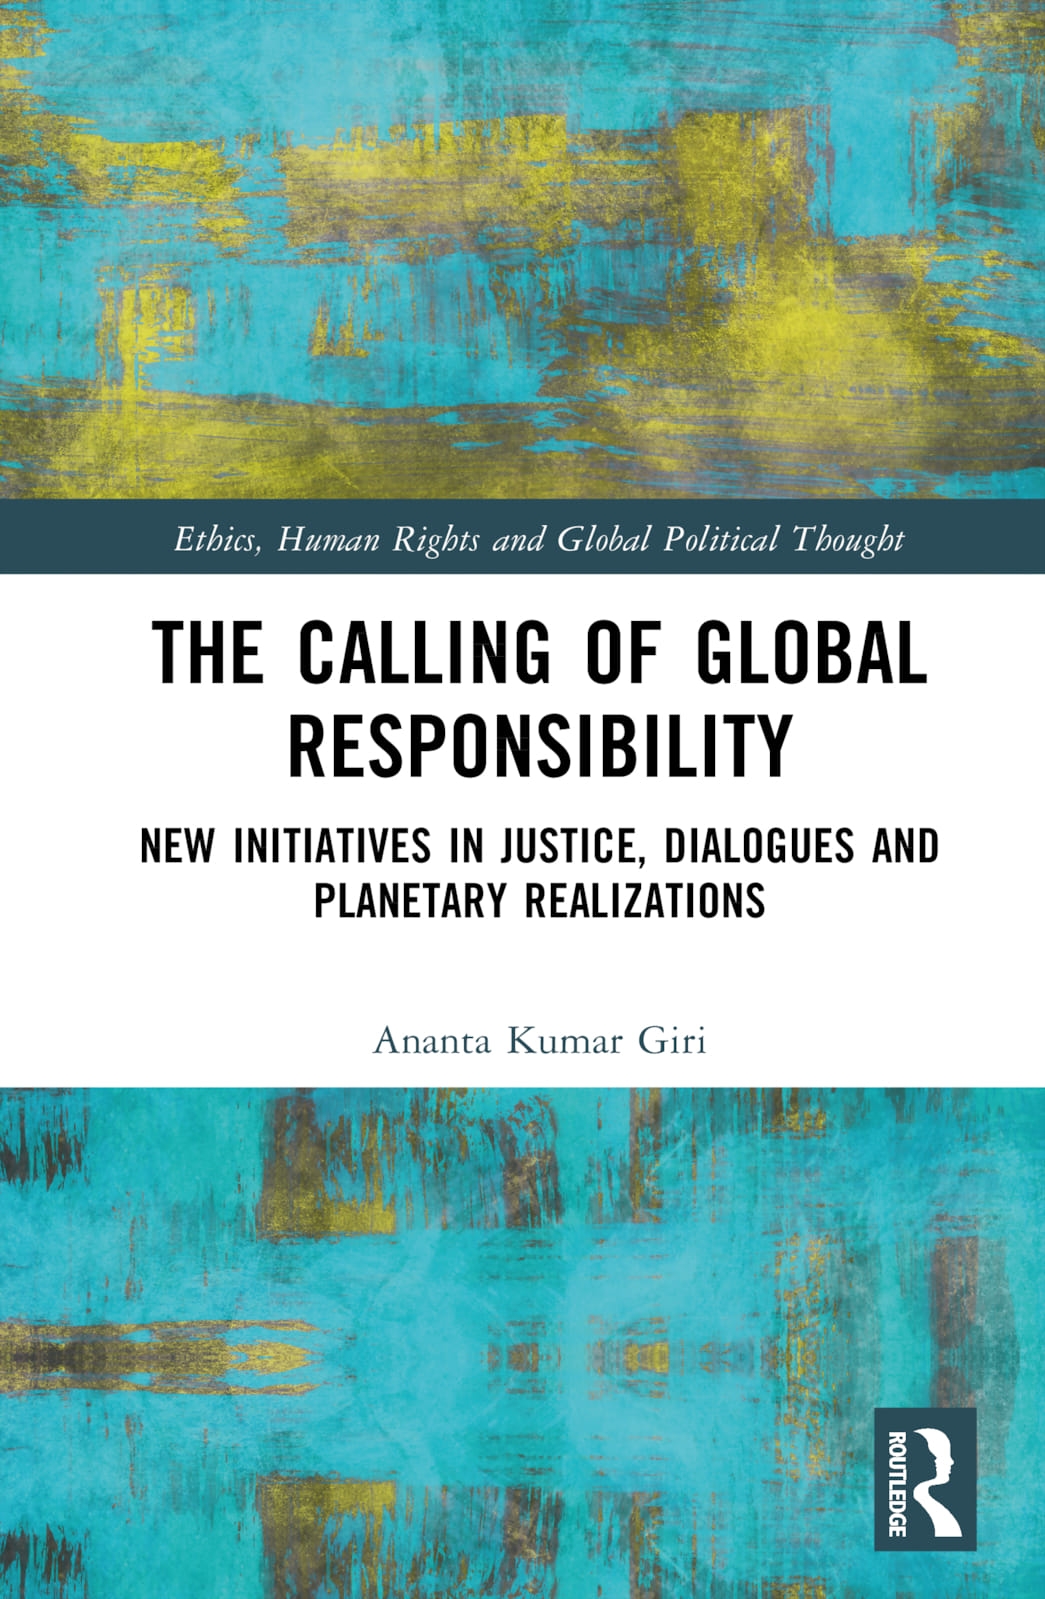 The Calling of Global Responsibility: New Initiatives in Justice, Dialogues and Planetary Realizations